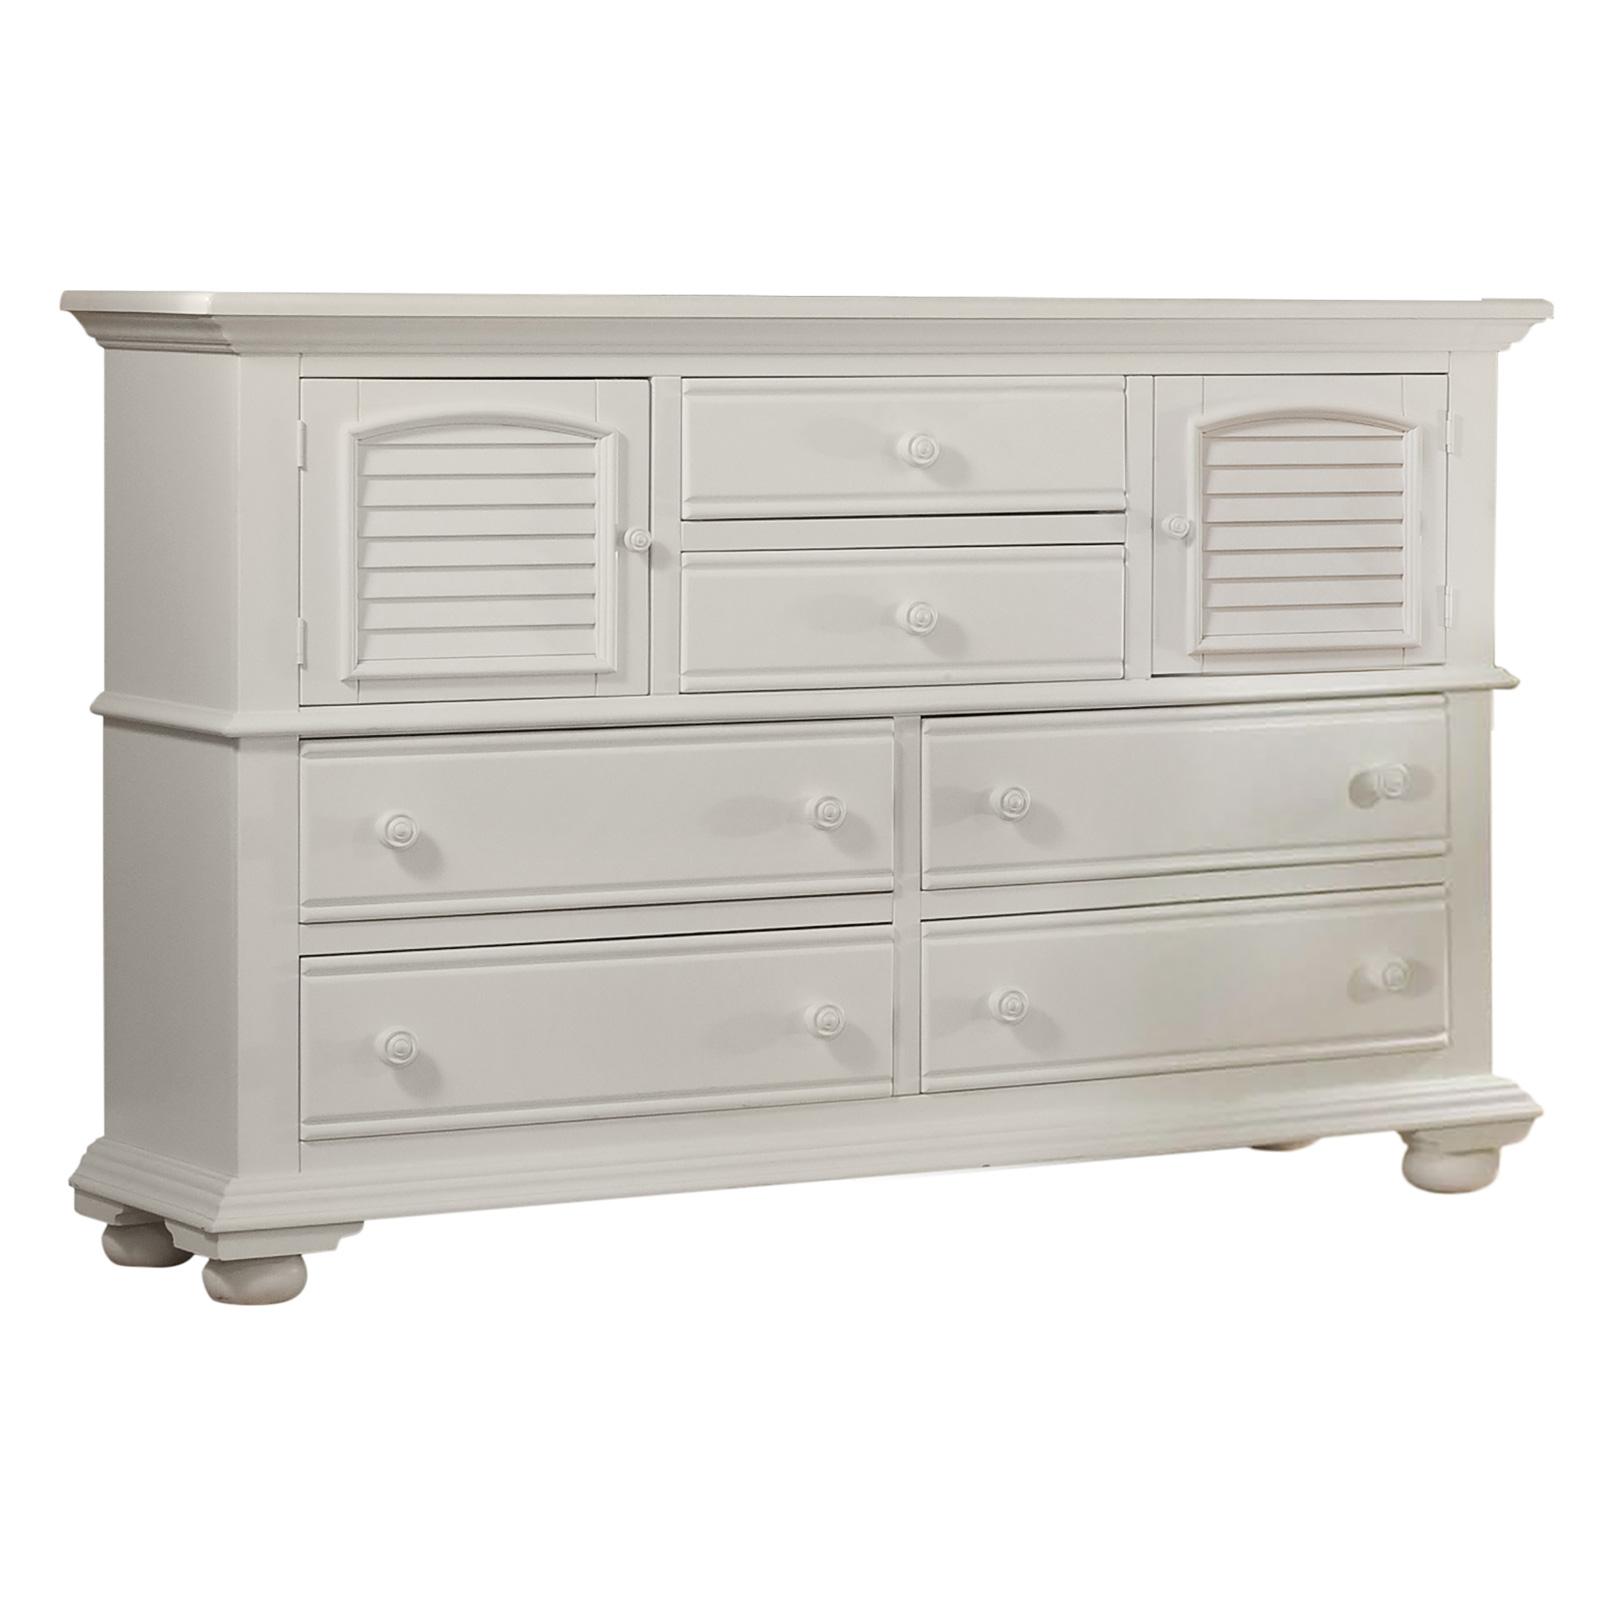 Classic, Traditional, Cottage Dresser COTTAGE 6510-262 6510-262 in White 